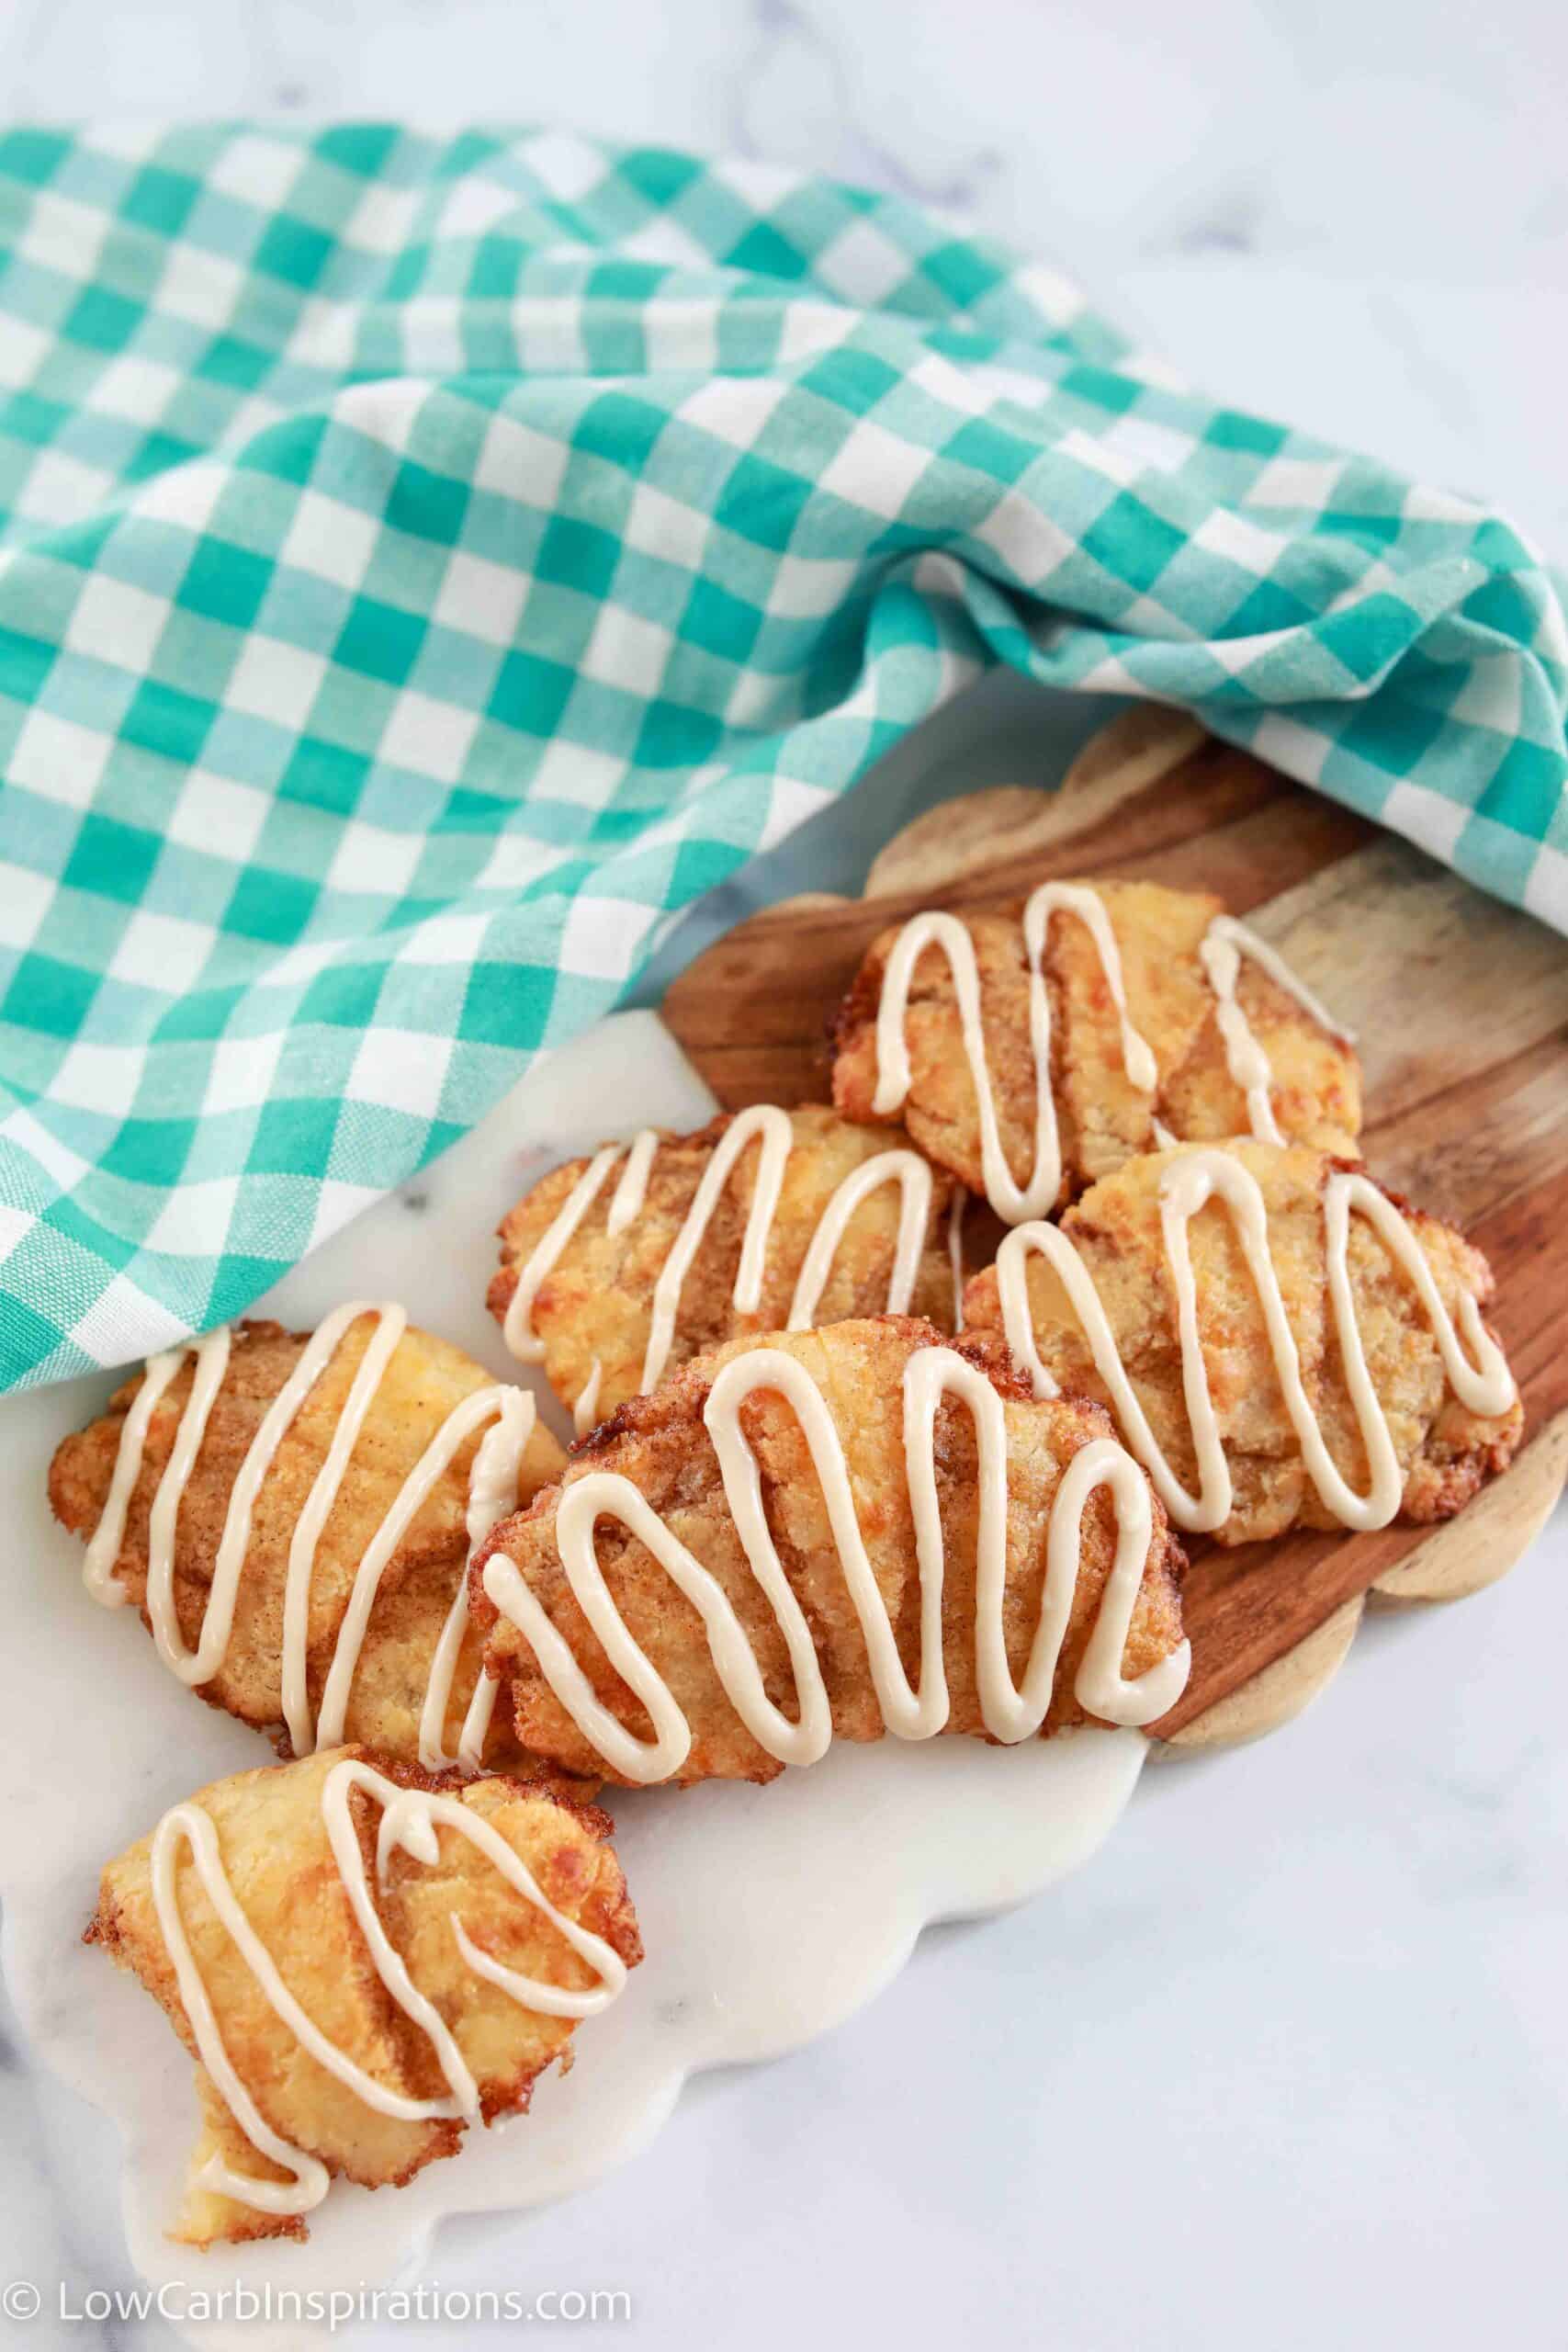 Healthy Cinnamon Croissants with icing